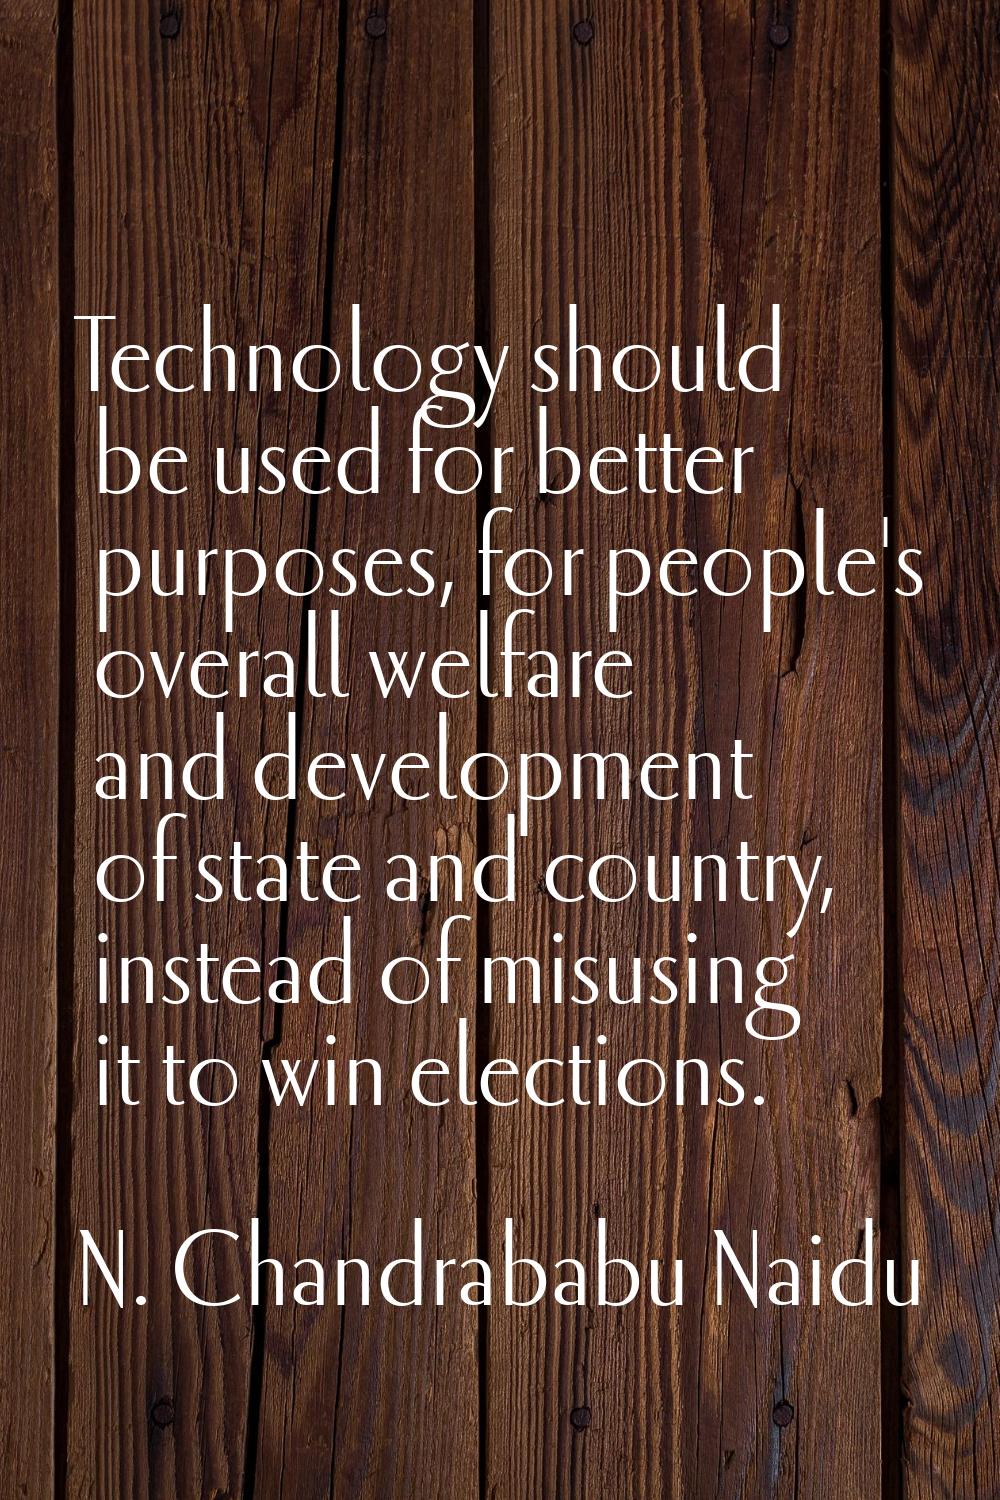 Technology should be used for better purposes, for people's overall welfare and development of stat